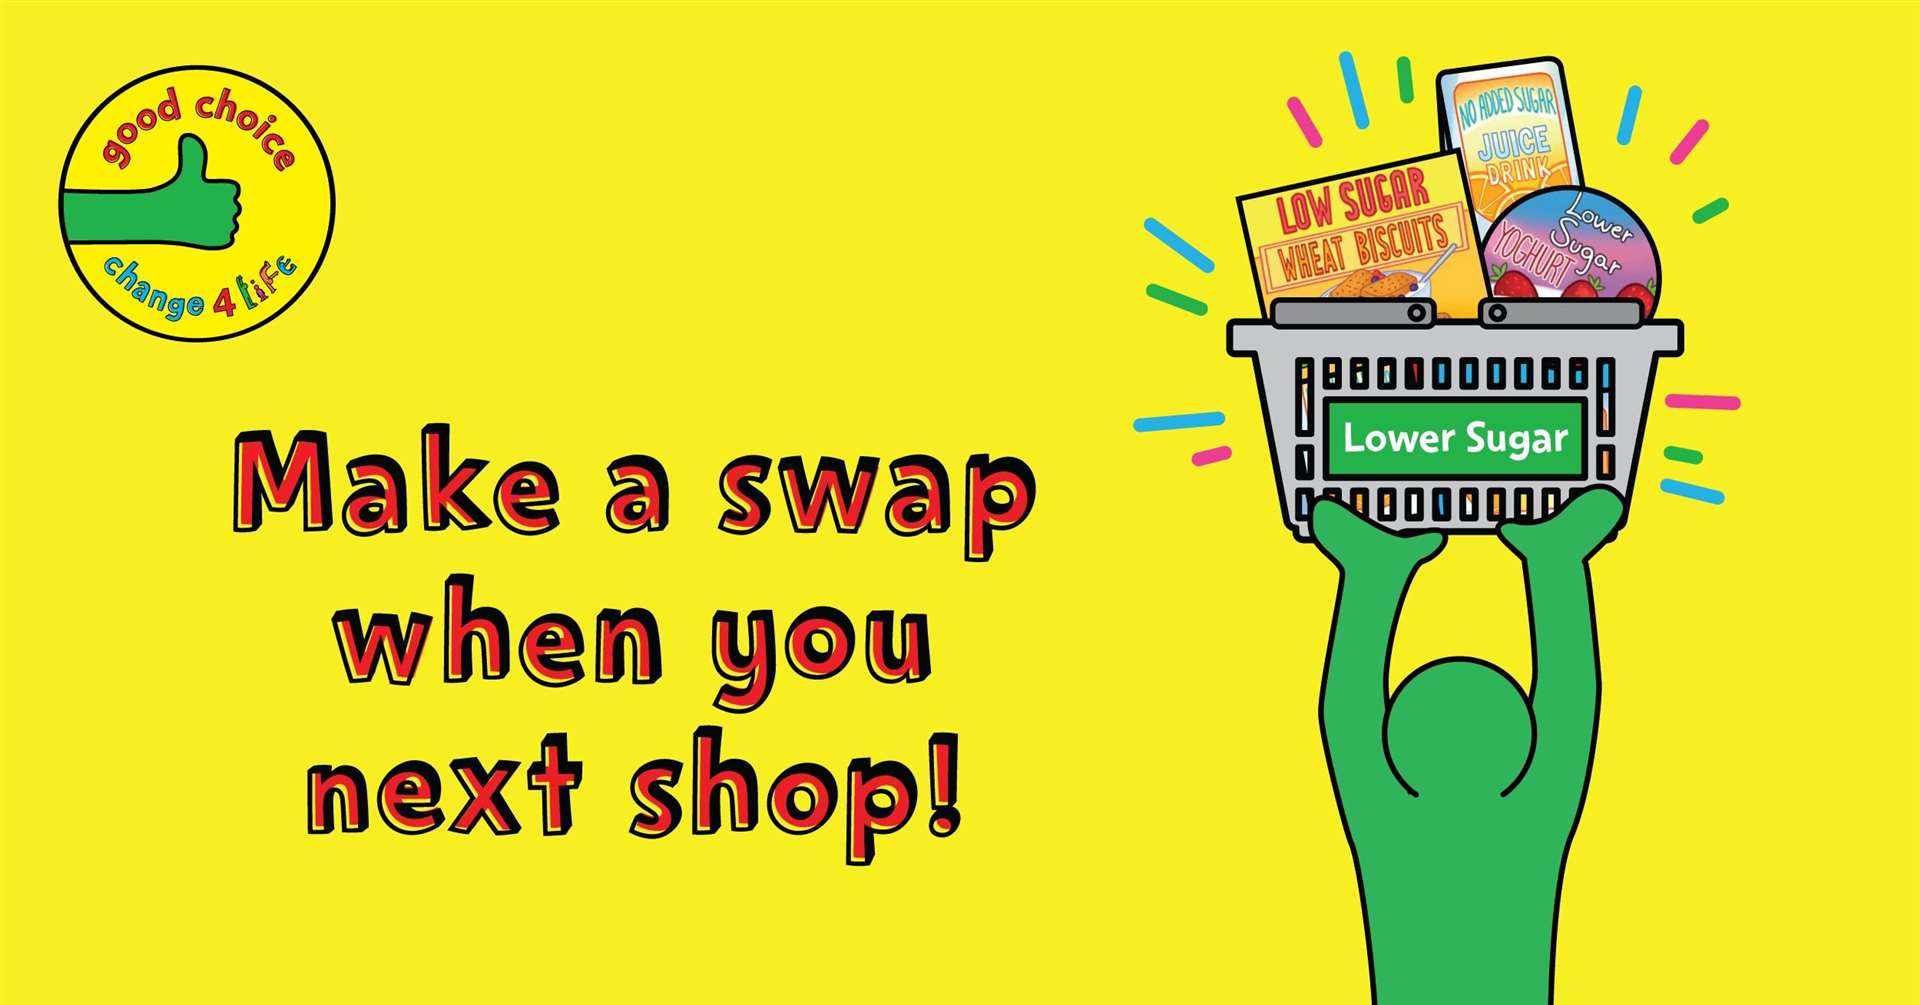 Help your child cut back with great sugar swap ideas and discover easy ways to make a swap when you next shop.